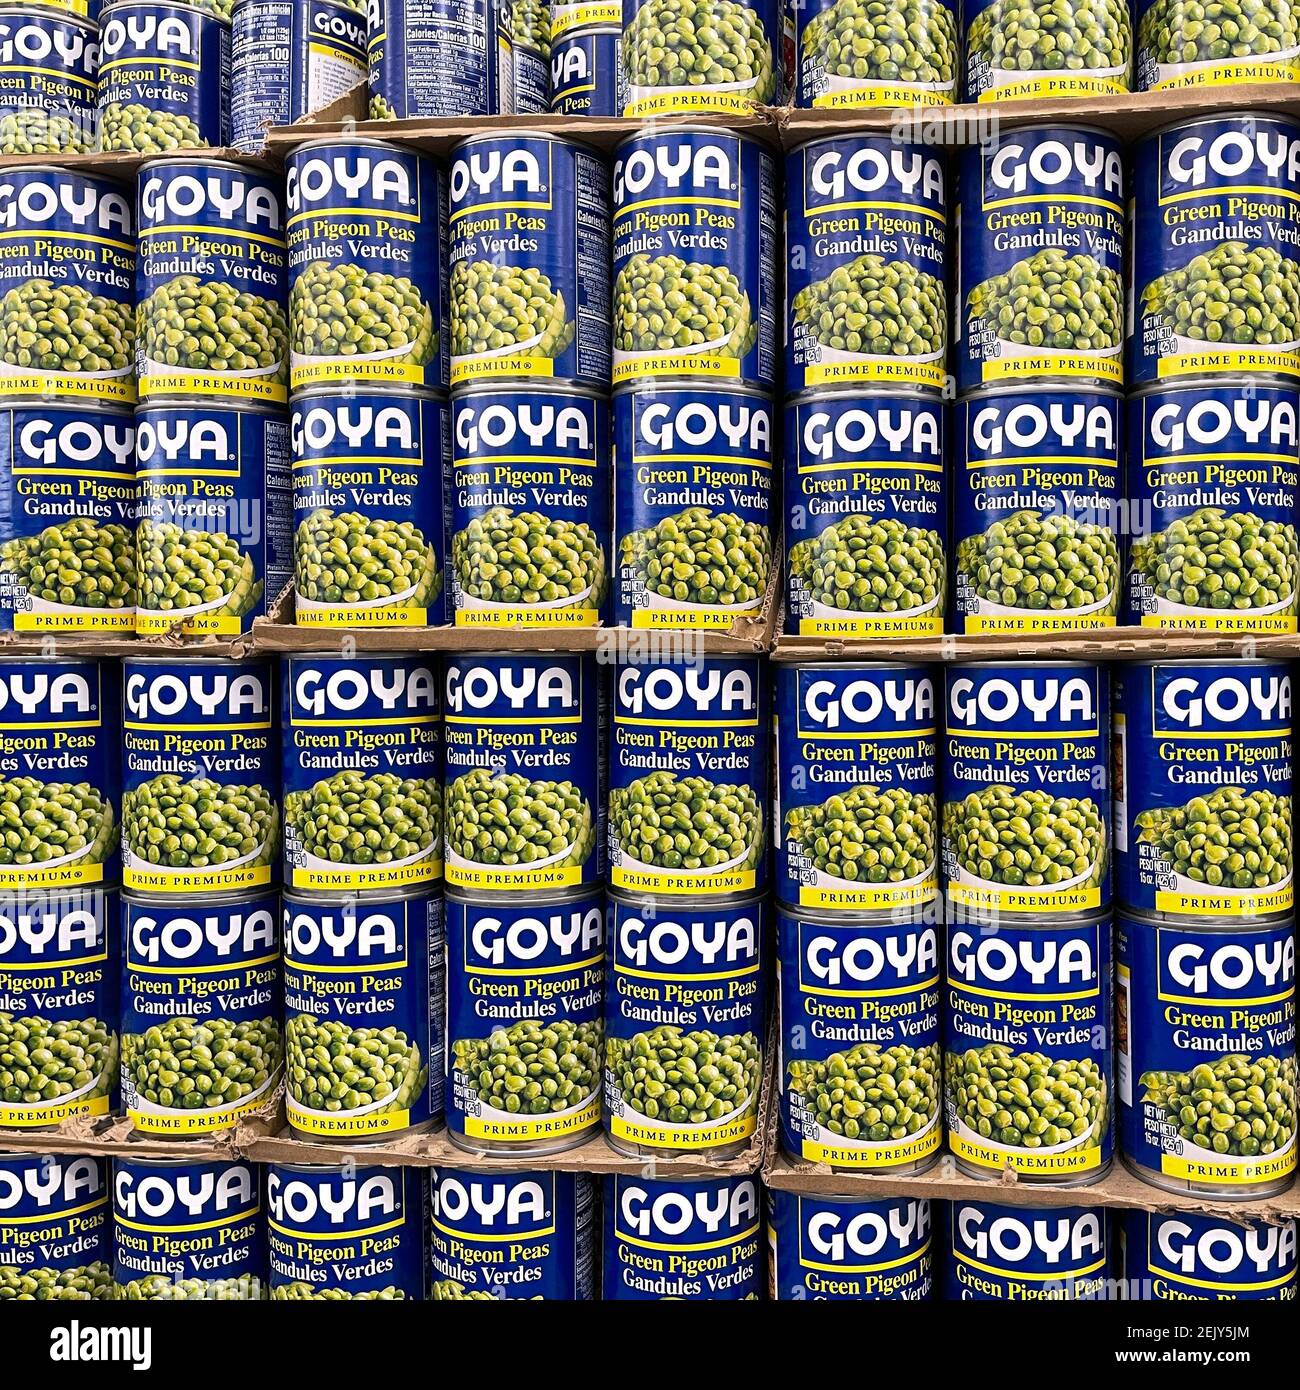 Orlando, FL USA - February 14, 2021:  The Goya canned Green Pigeon Peas display at a Walmart Grocery Store in Orlando, Florida. Stock Photo